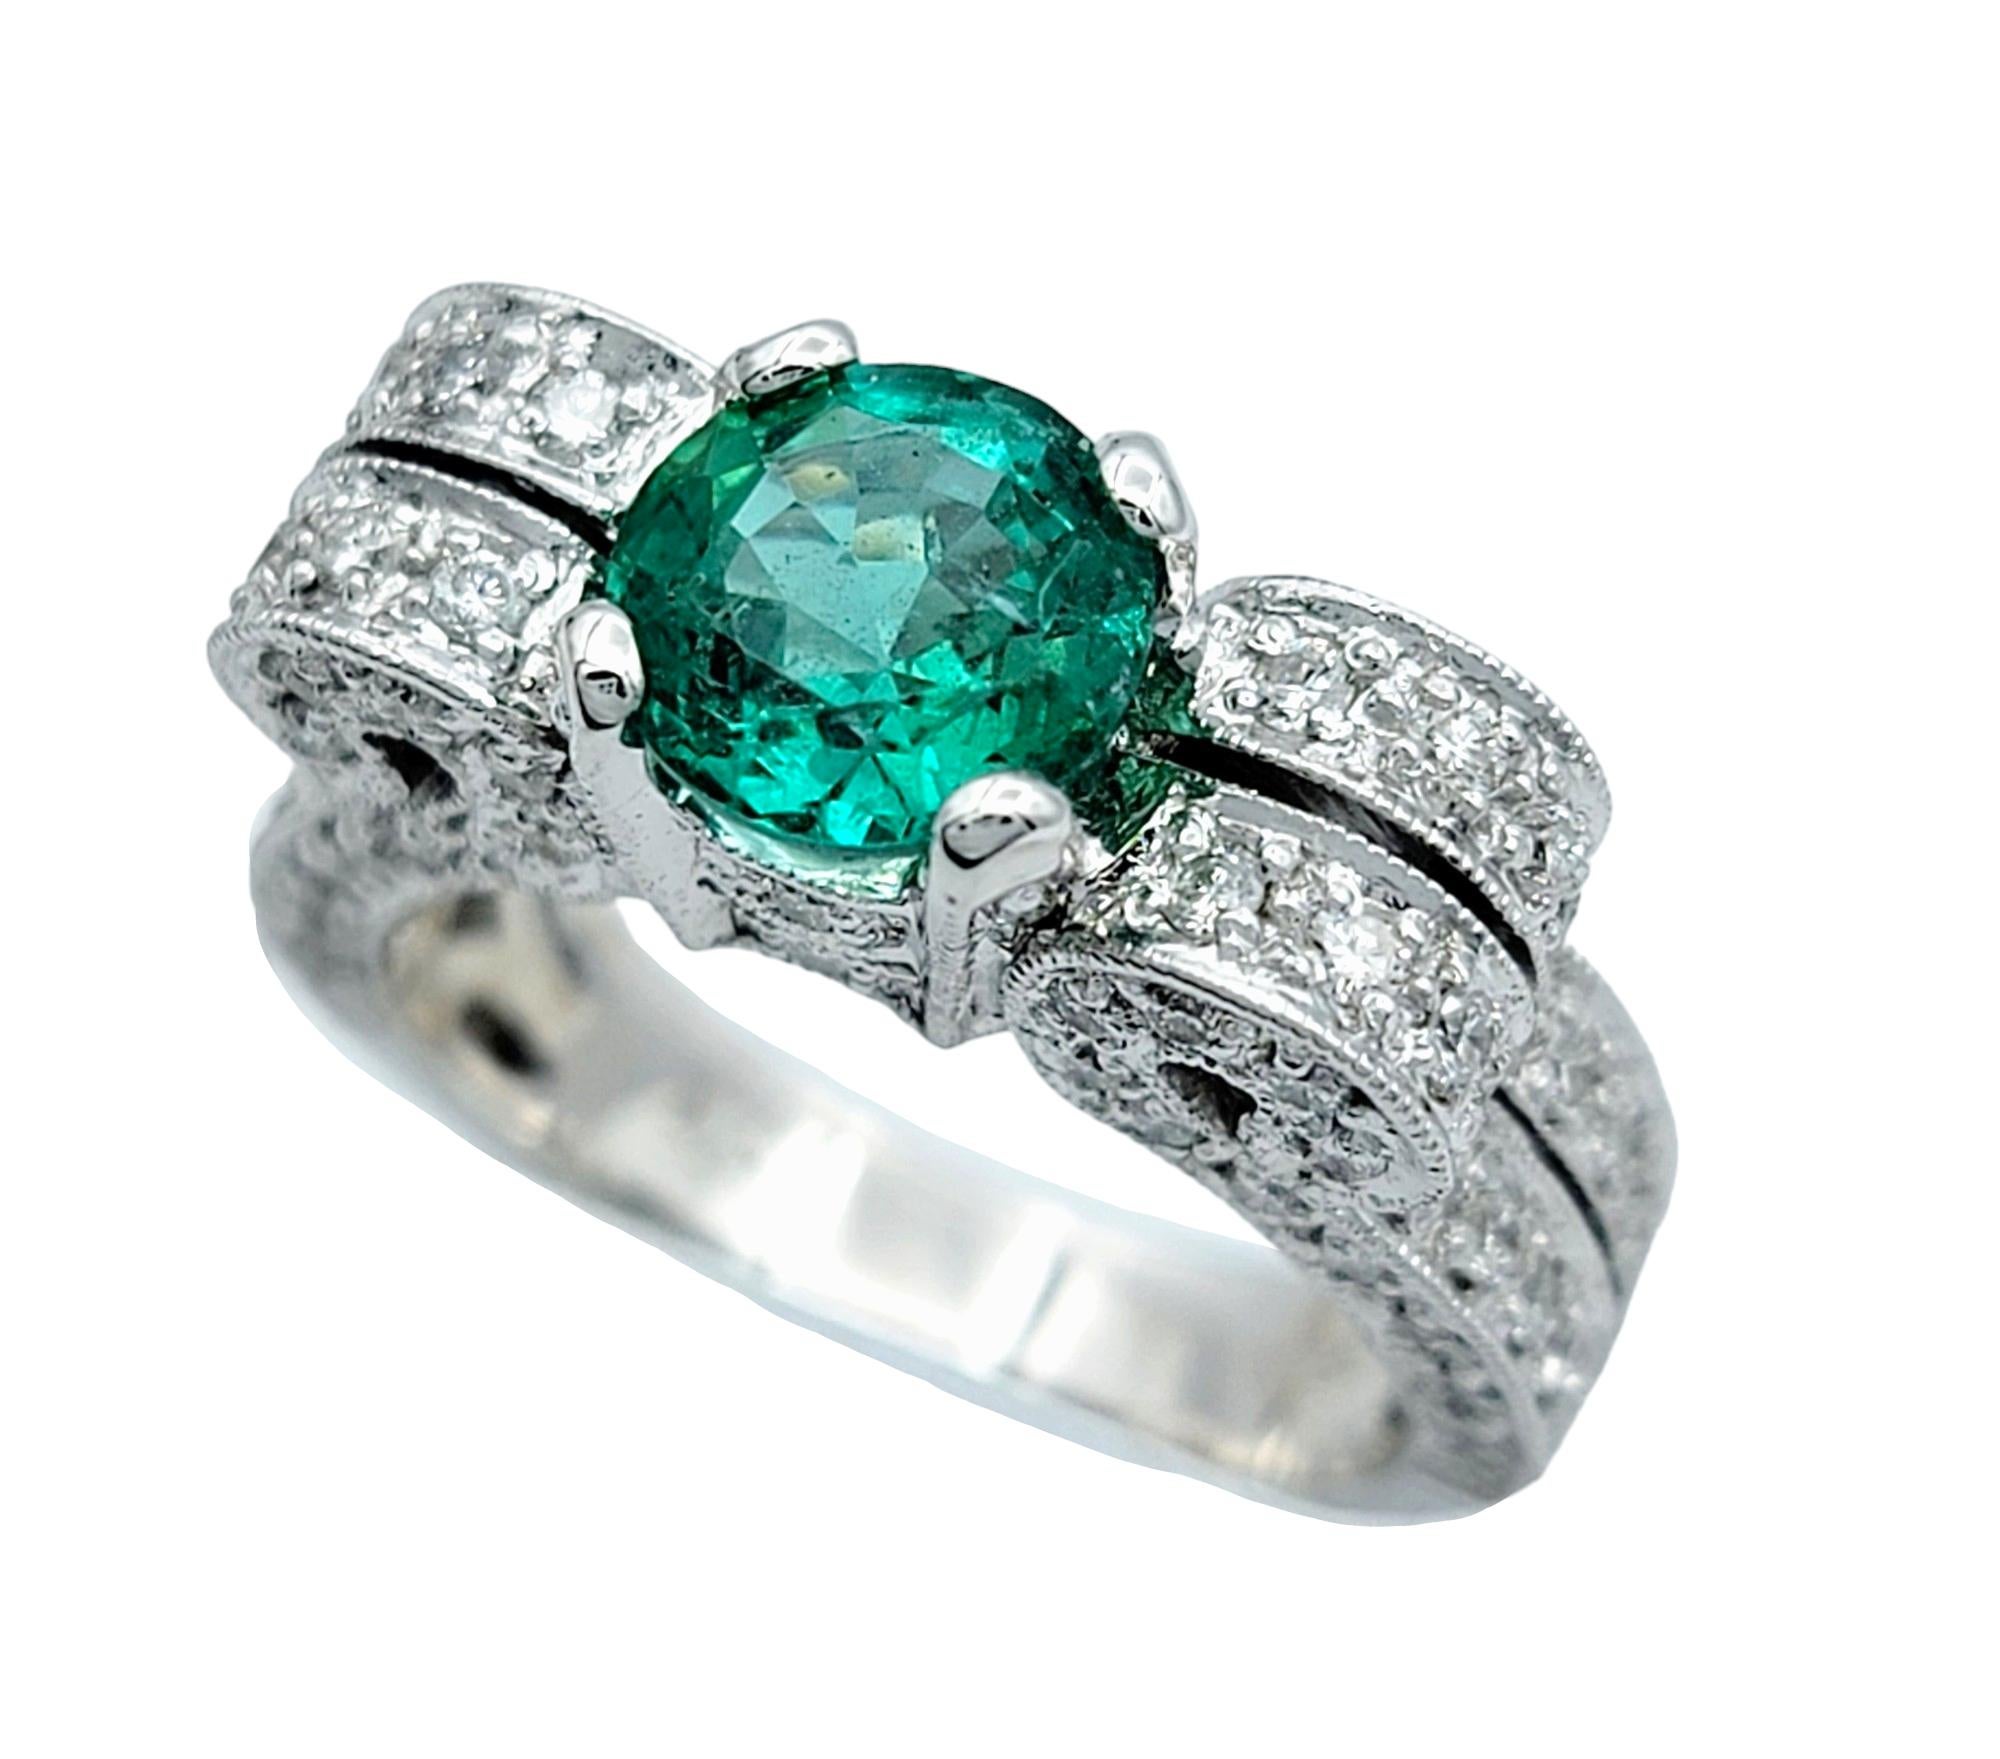 Ring size: 5

Indulge in utter luxury with this exquisite emerald and diamond ring, set in opulent 18k white gold. The emerald takes center stage, held securely in a classic 4-prong setting, allowing its vibrant green hue to shine with unparalleled